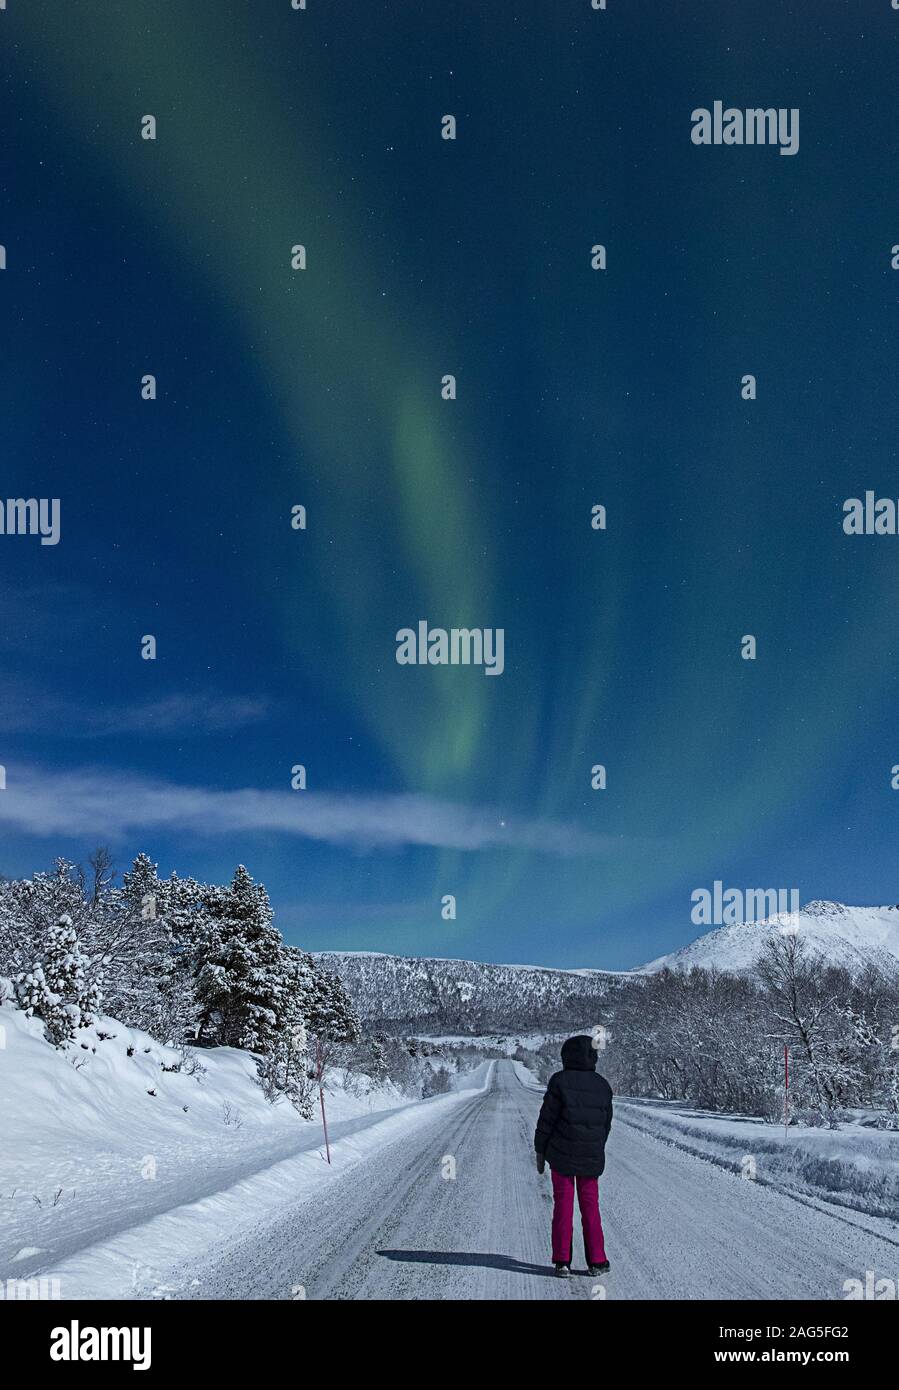 Vertical shot of a person standing on a snow covered road under the northern lights in the sky Stock Photo